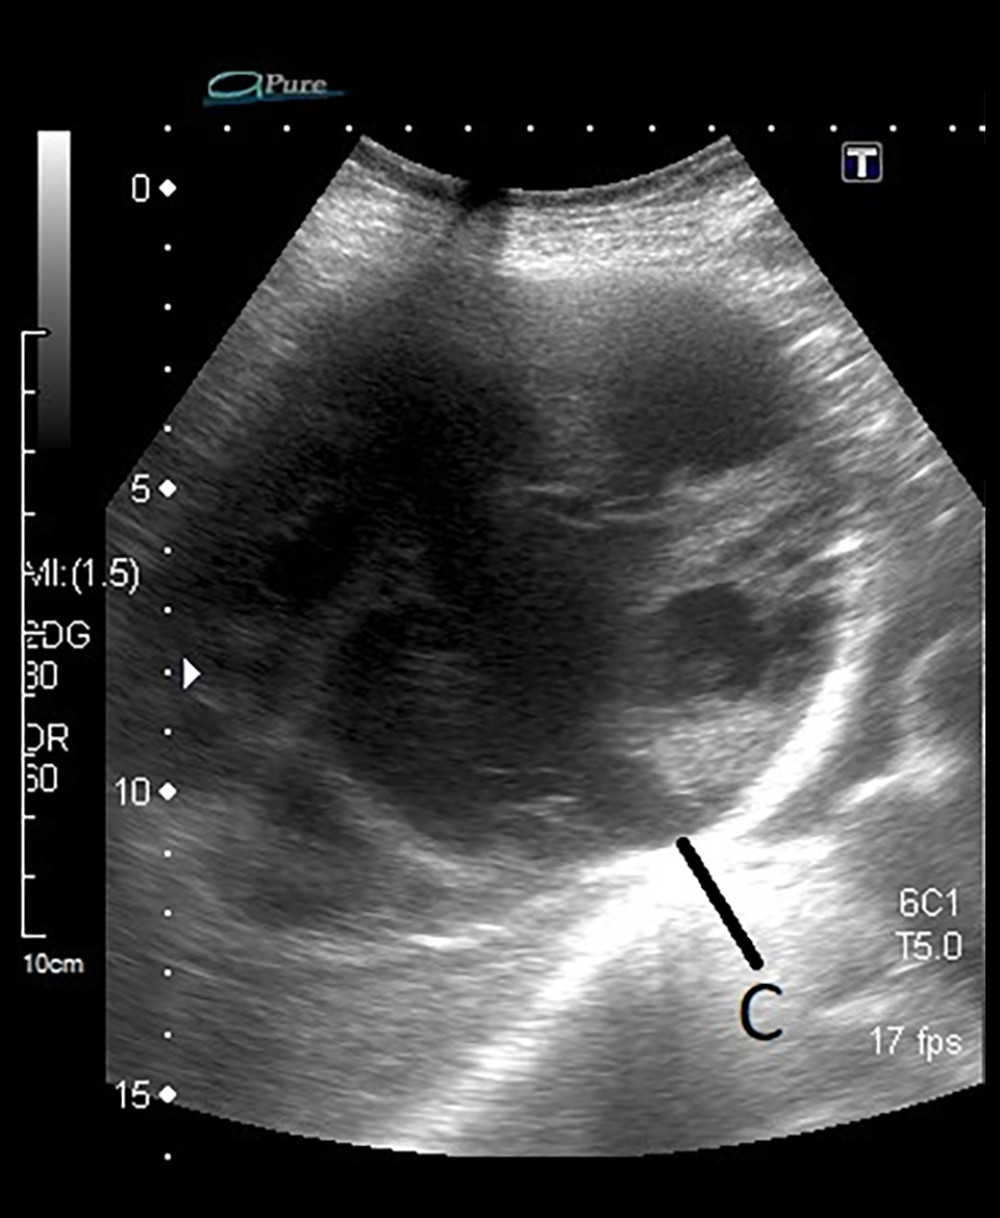 Sonographic image of the liver. The hydatid cyst is marked as “C”.